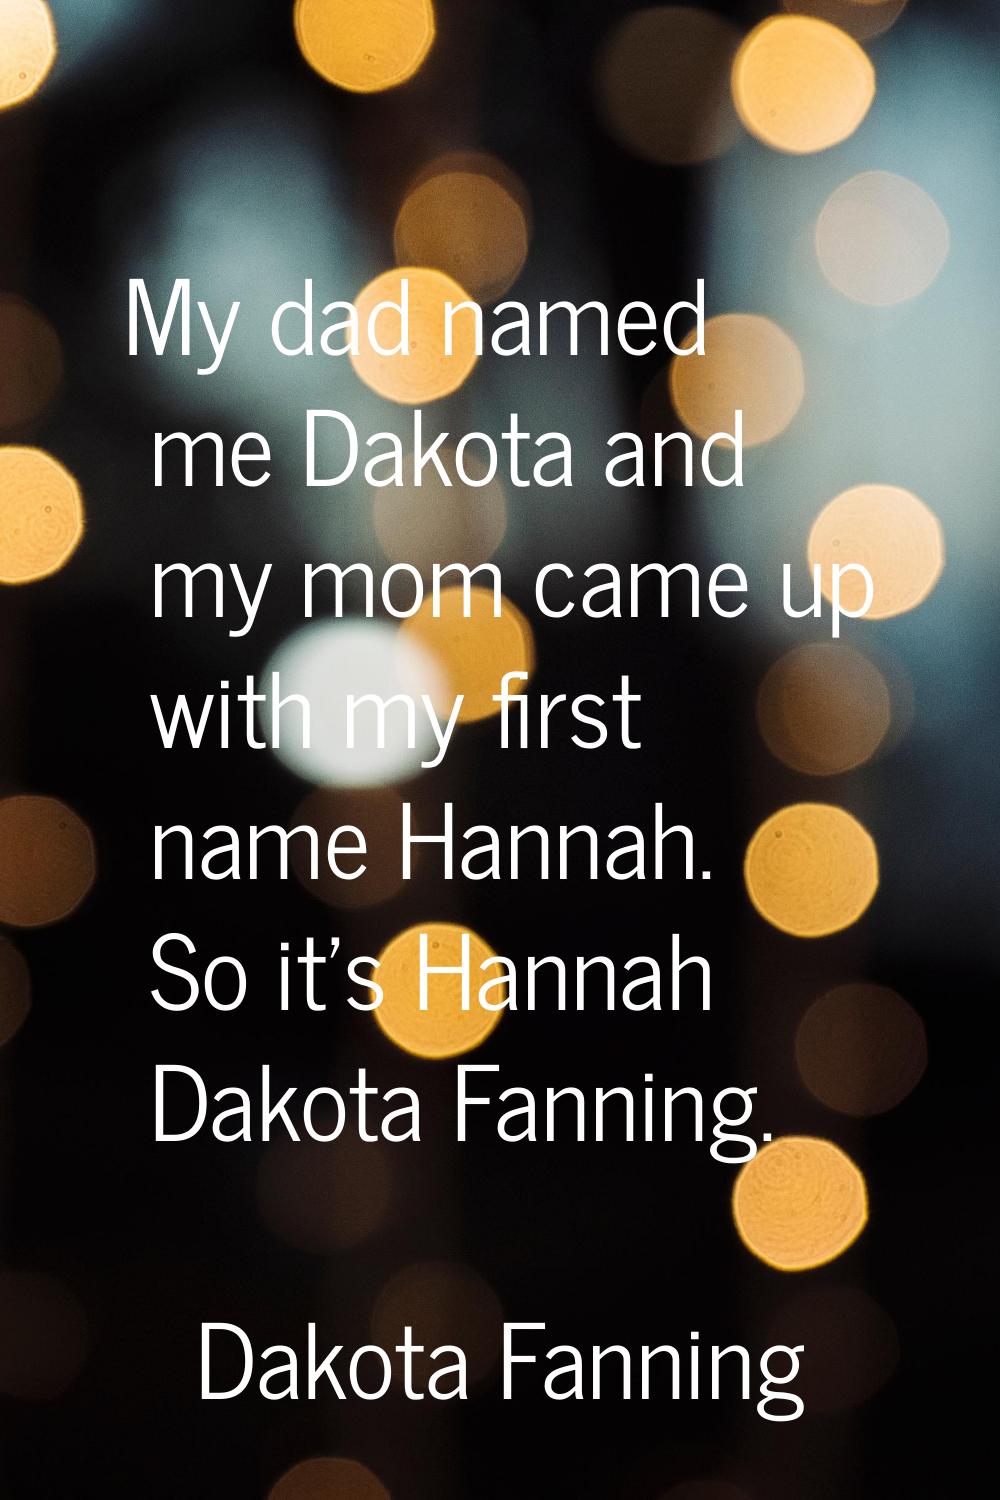 My dad named me Dakota and my mom came up with my first name Hannah. So it's Hannah Dakota Fanning.